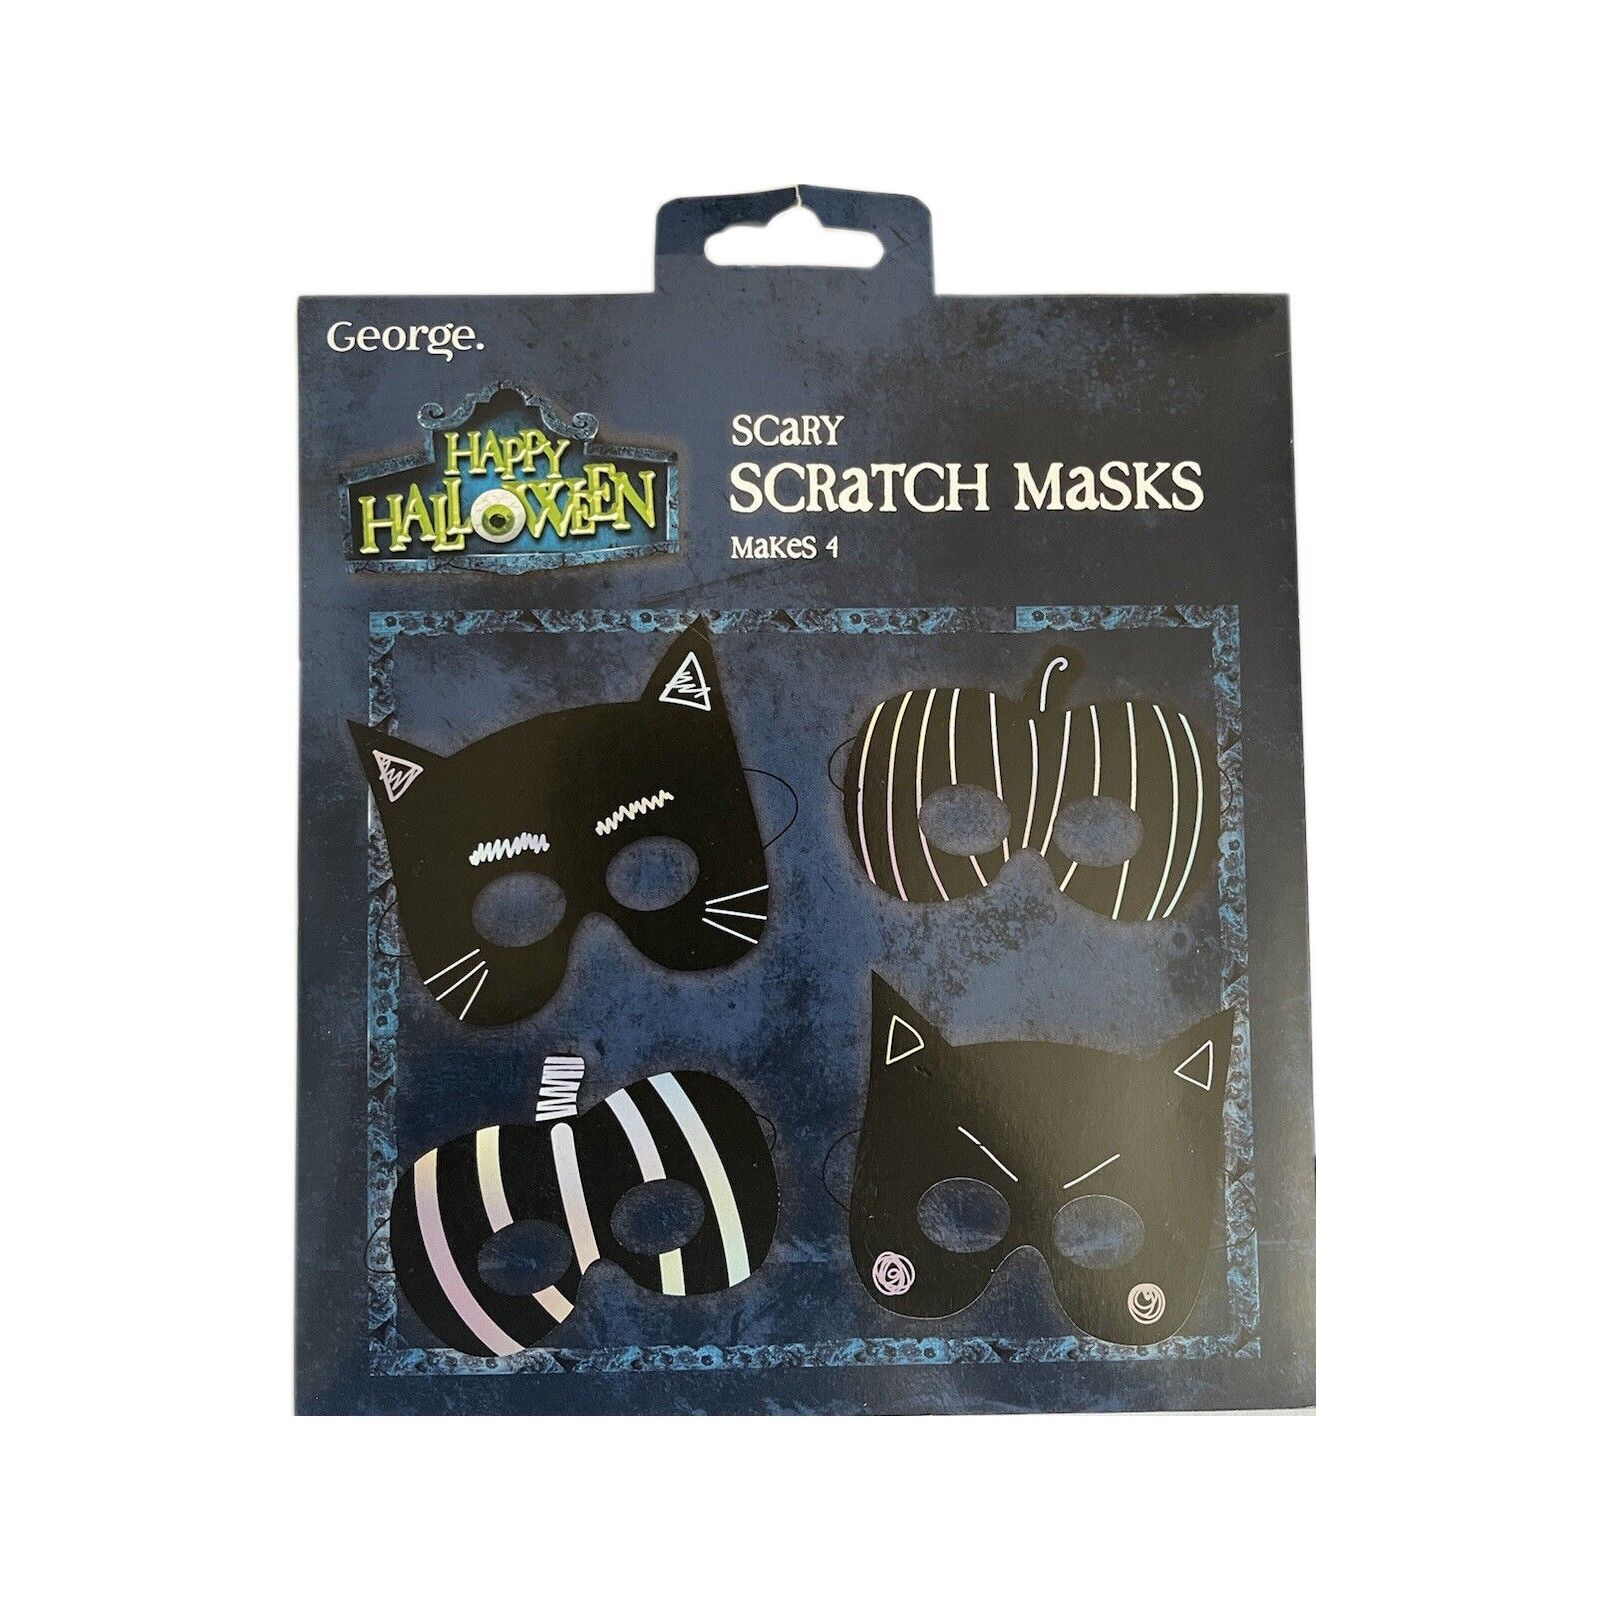 George Happy Halloween Scary Scratch Masks Makes 4 RRP 3.25 CLEARANCE XL 2.50